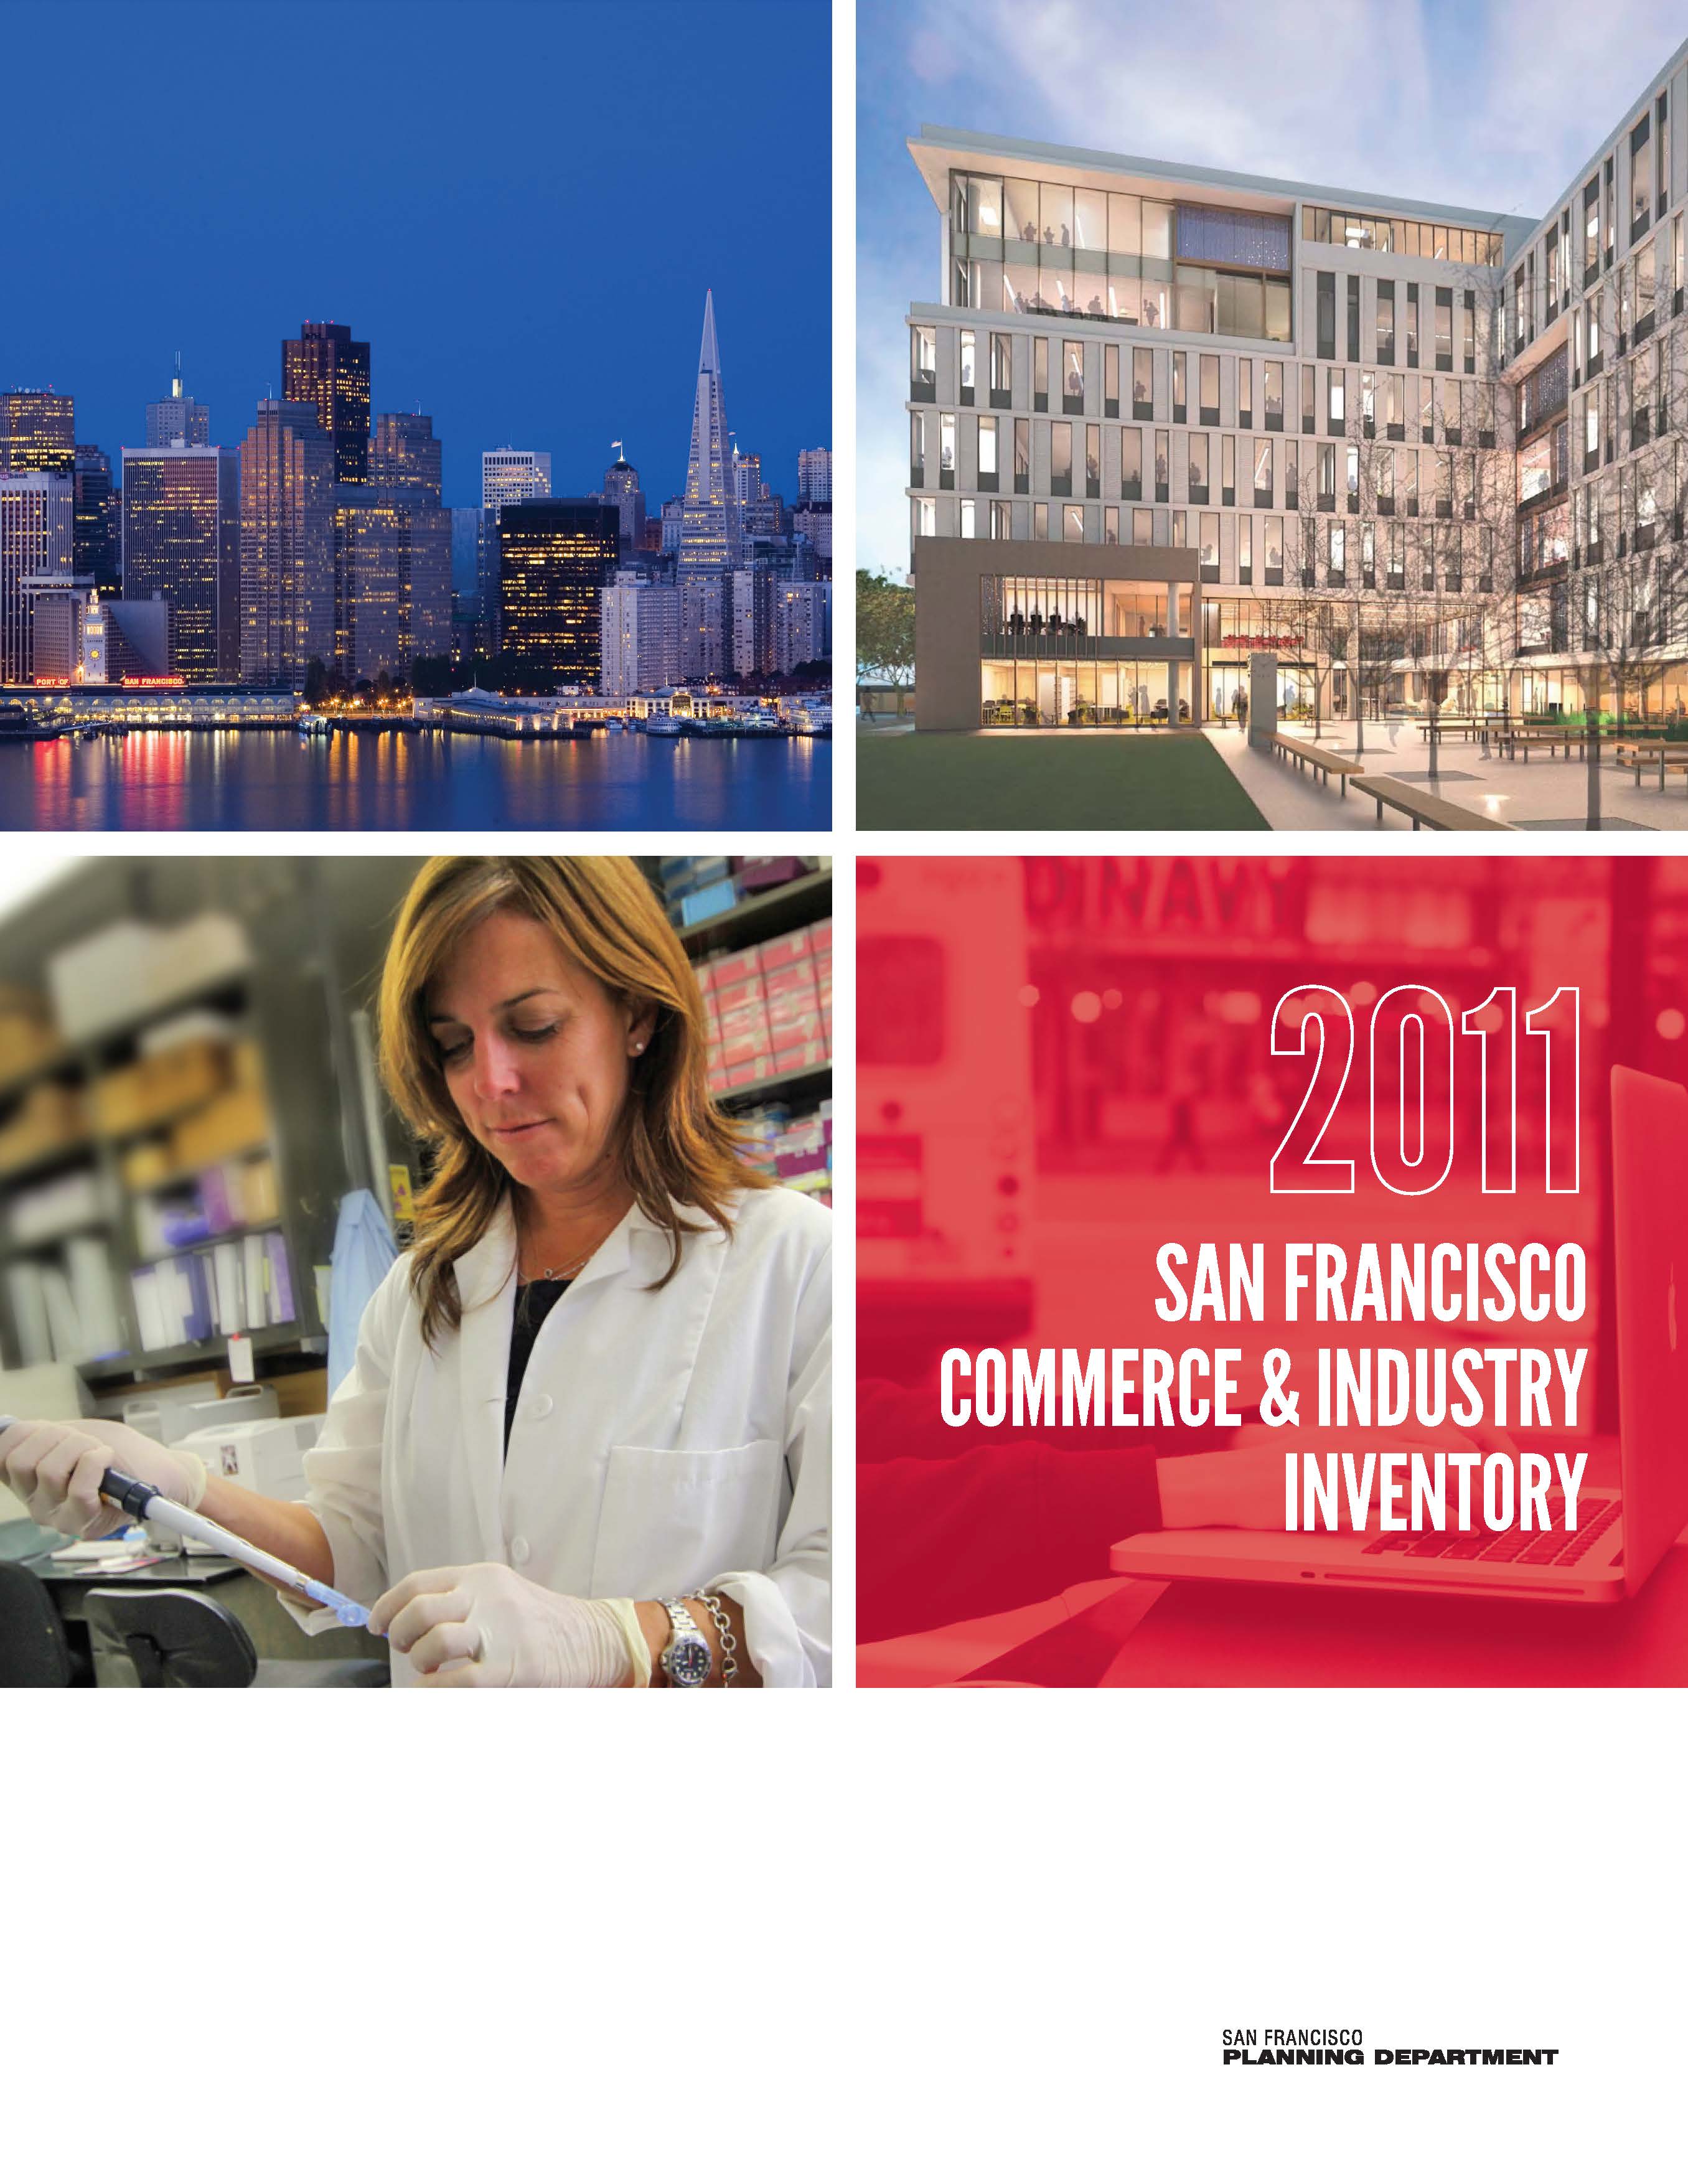 Cover Image for the Commerce & Industry Inventory Report November 2011